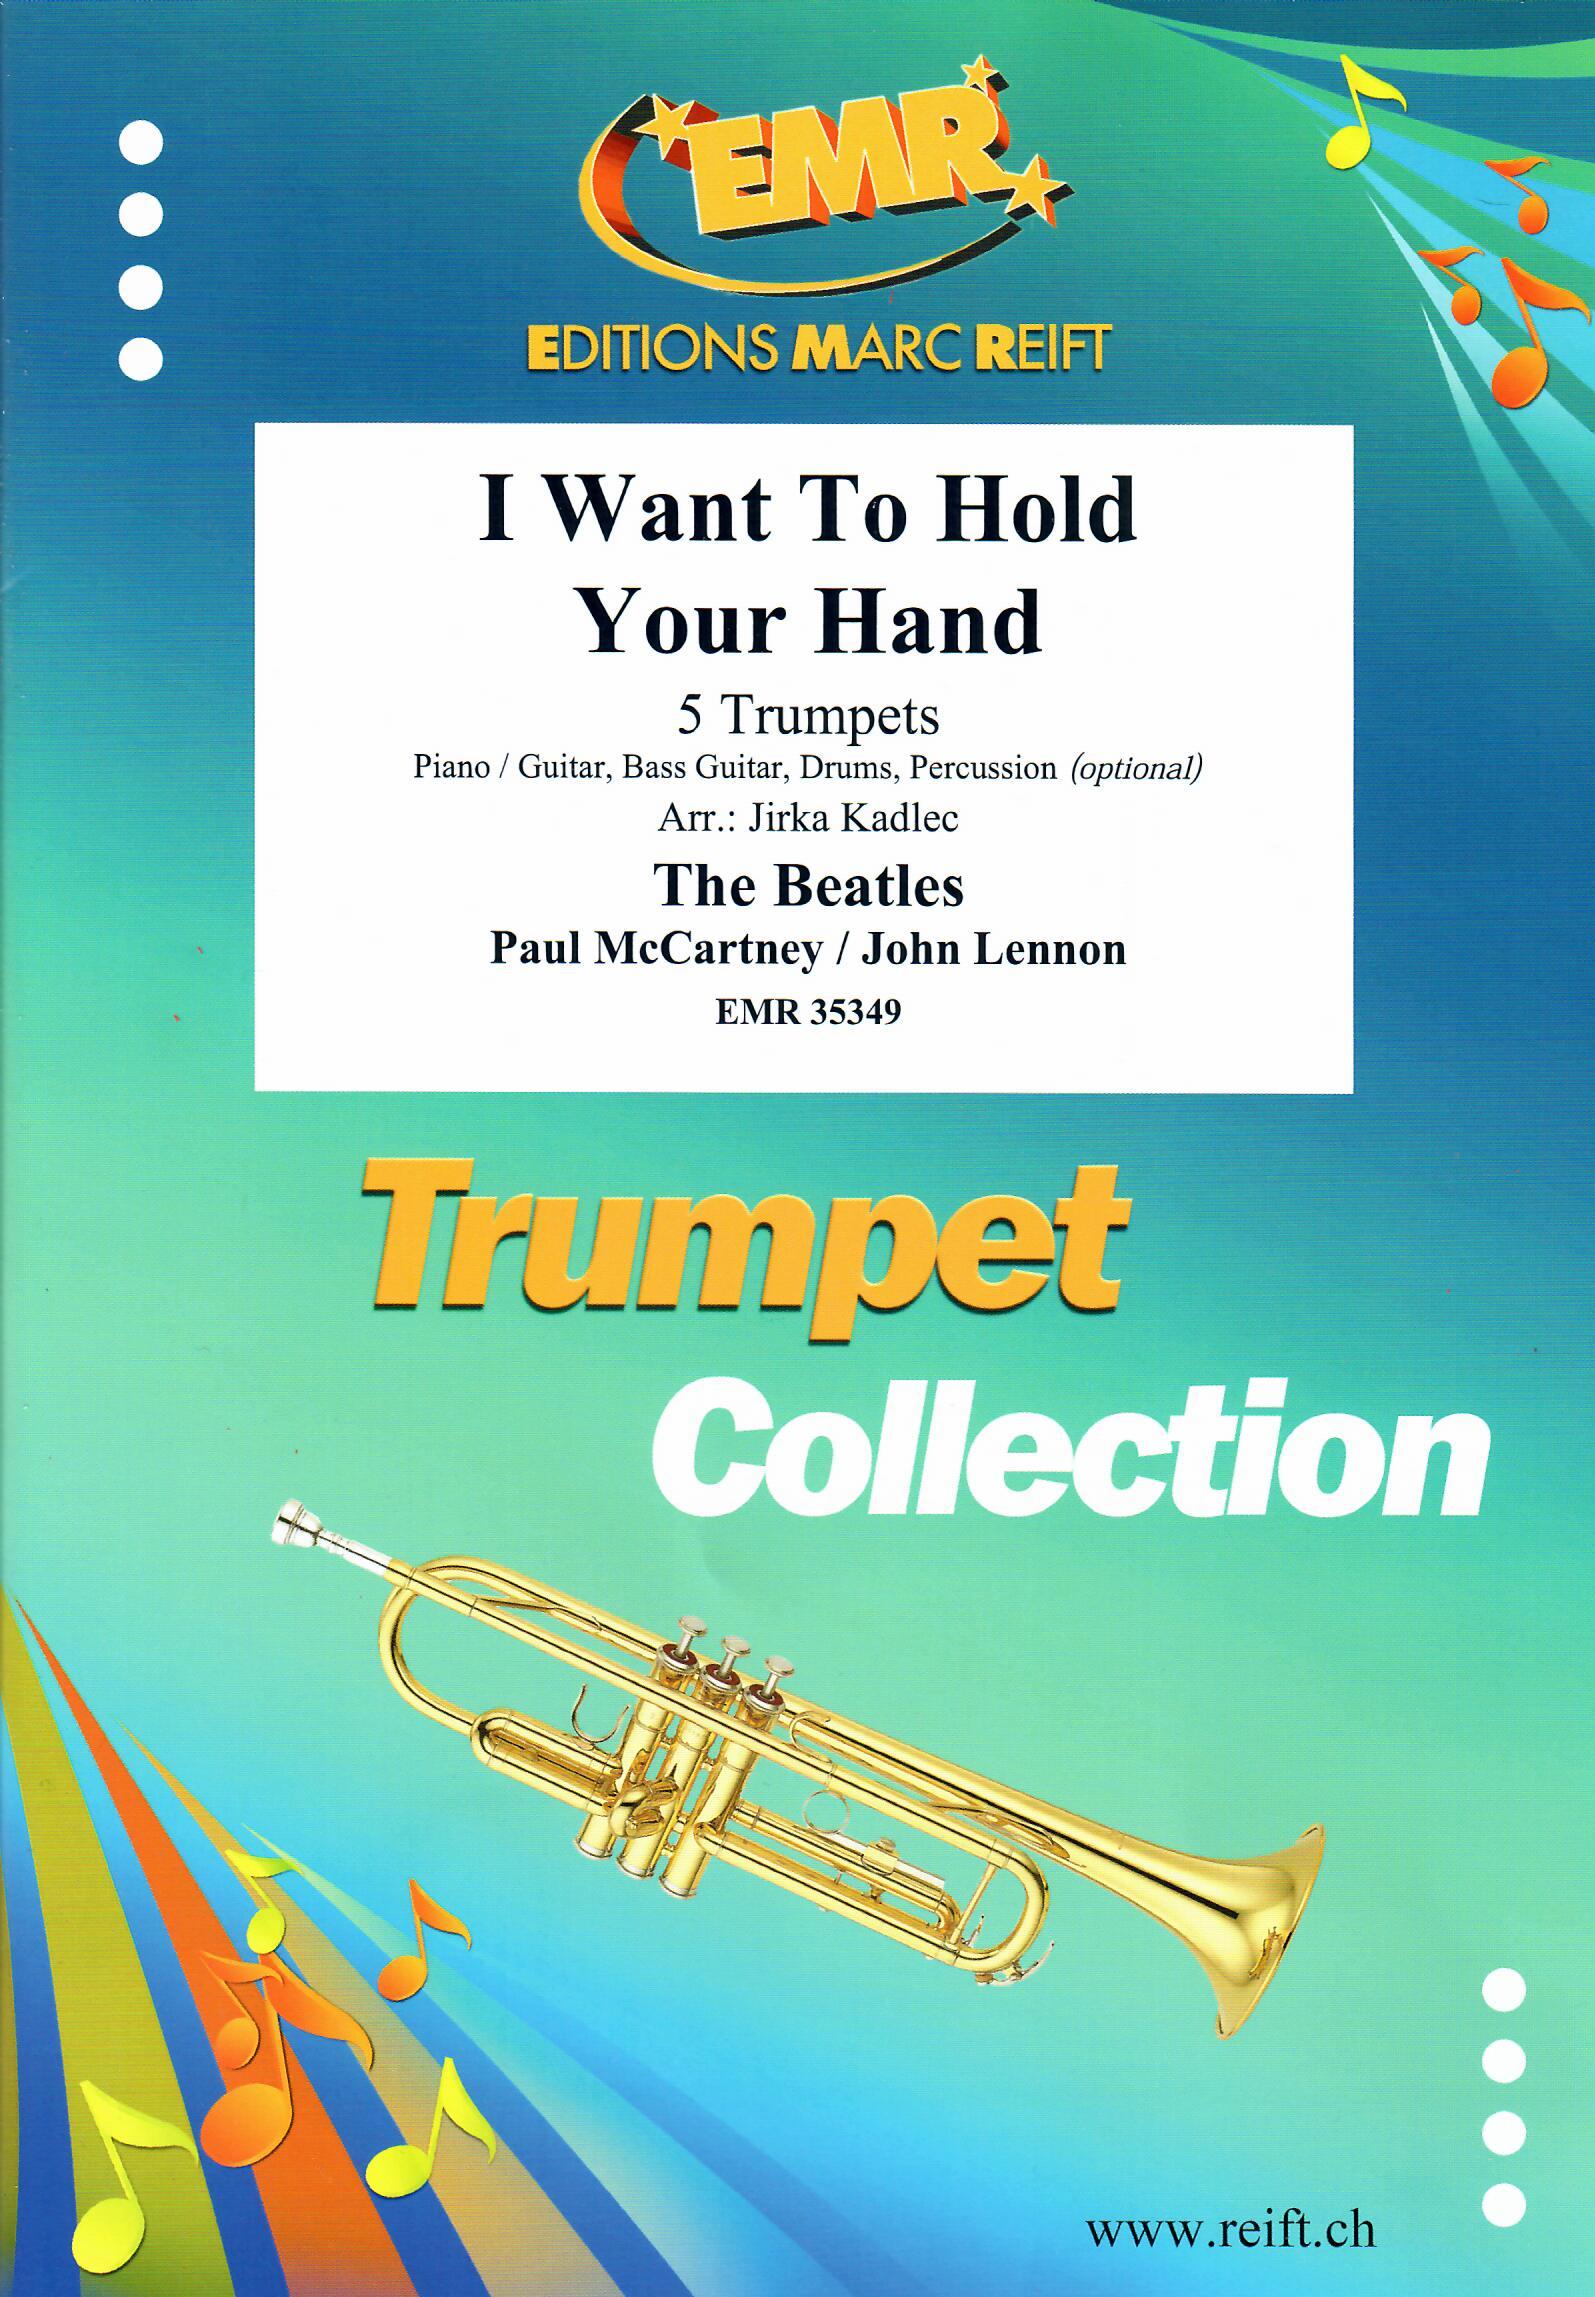 I WANT TO HOLD YOUR HAND, SOLOS - B♭. Cornet/Trumpet with Piano